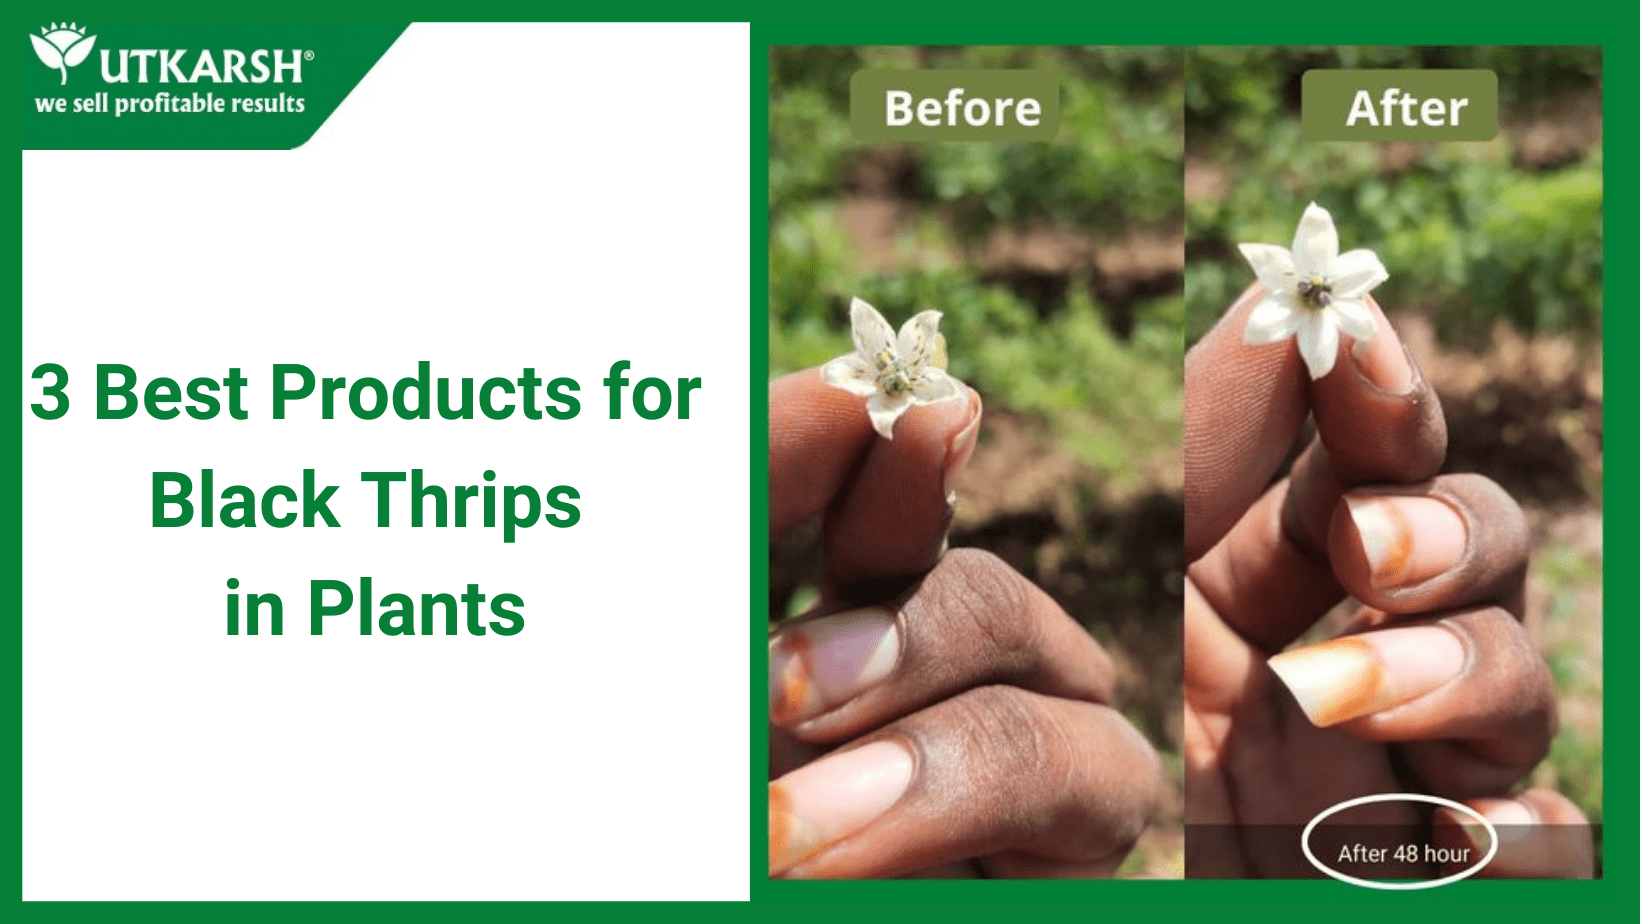 3 Best Products for Black Thrips in Chili Farm